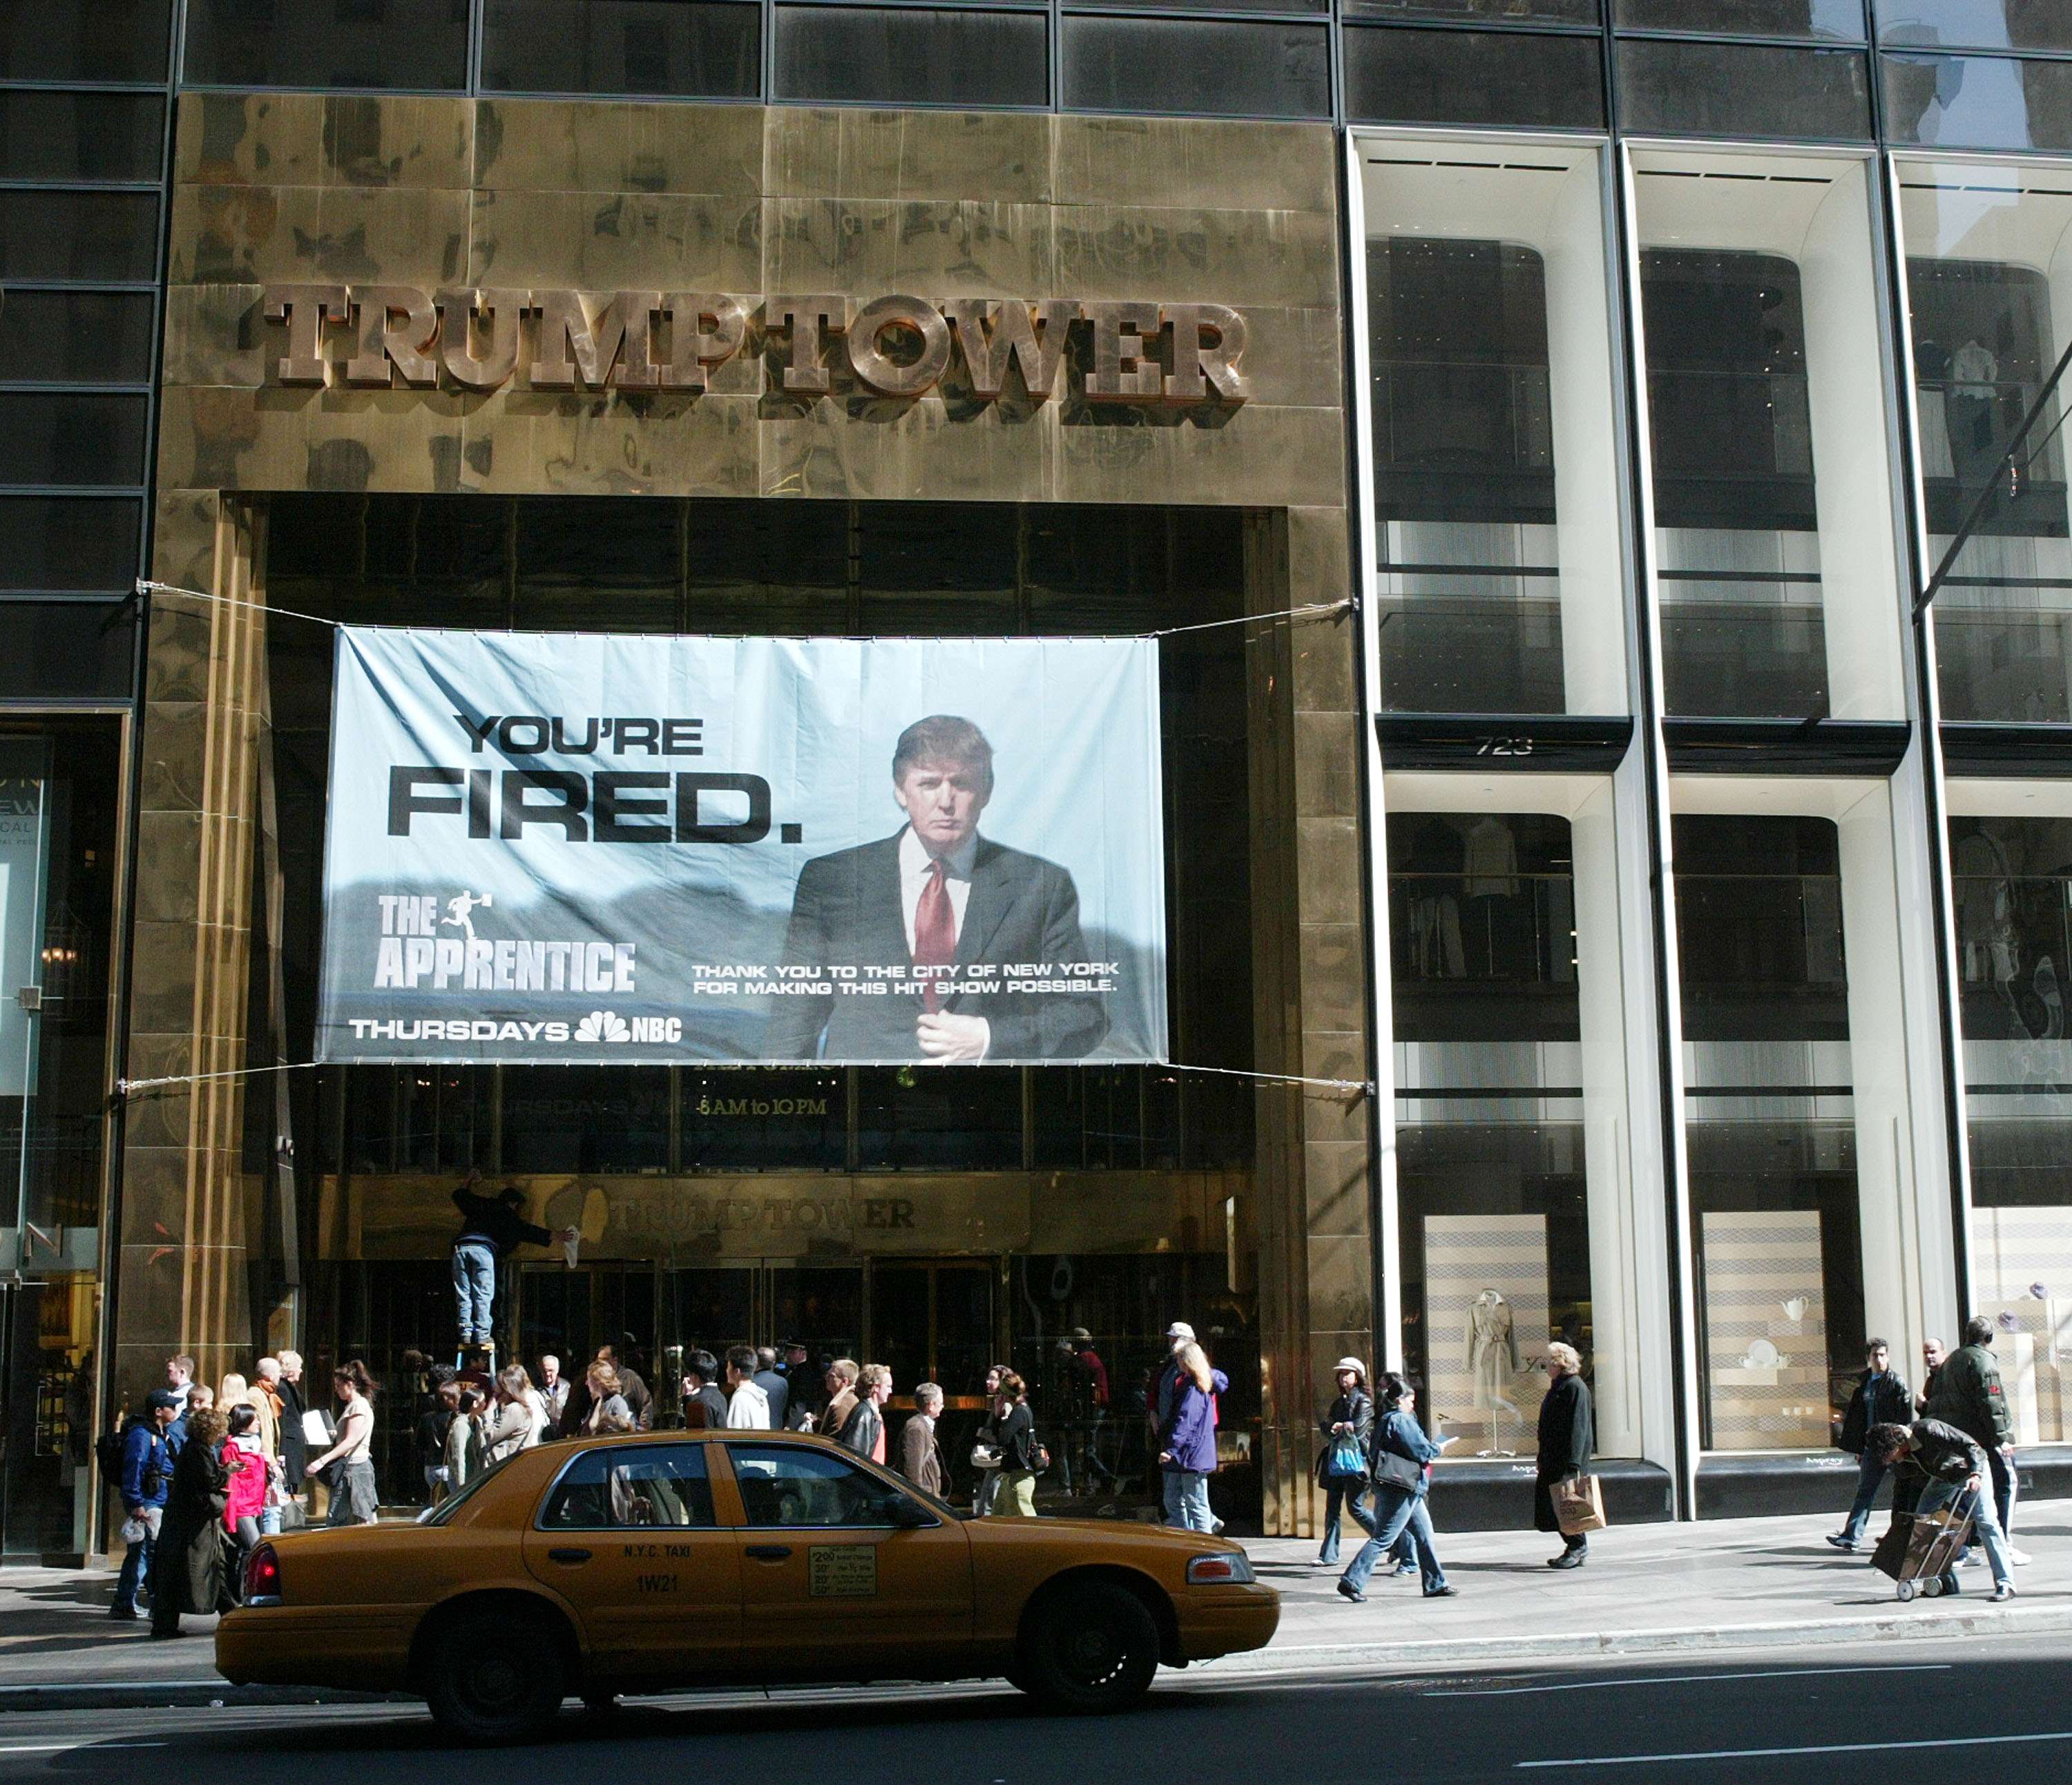 A sign advertising Donald Trump’s former reality television show ‘The Apprentice’ at Trump Towers in New York City. Photo: Getty Images